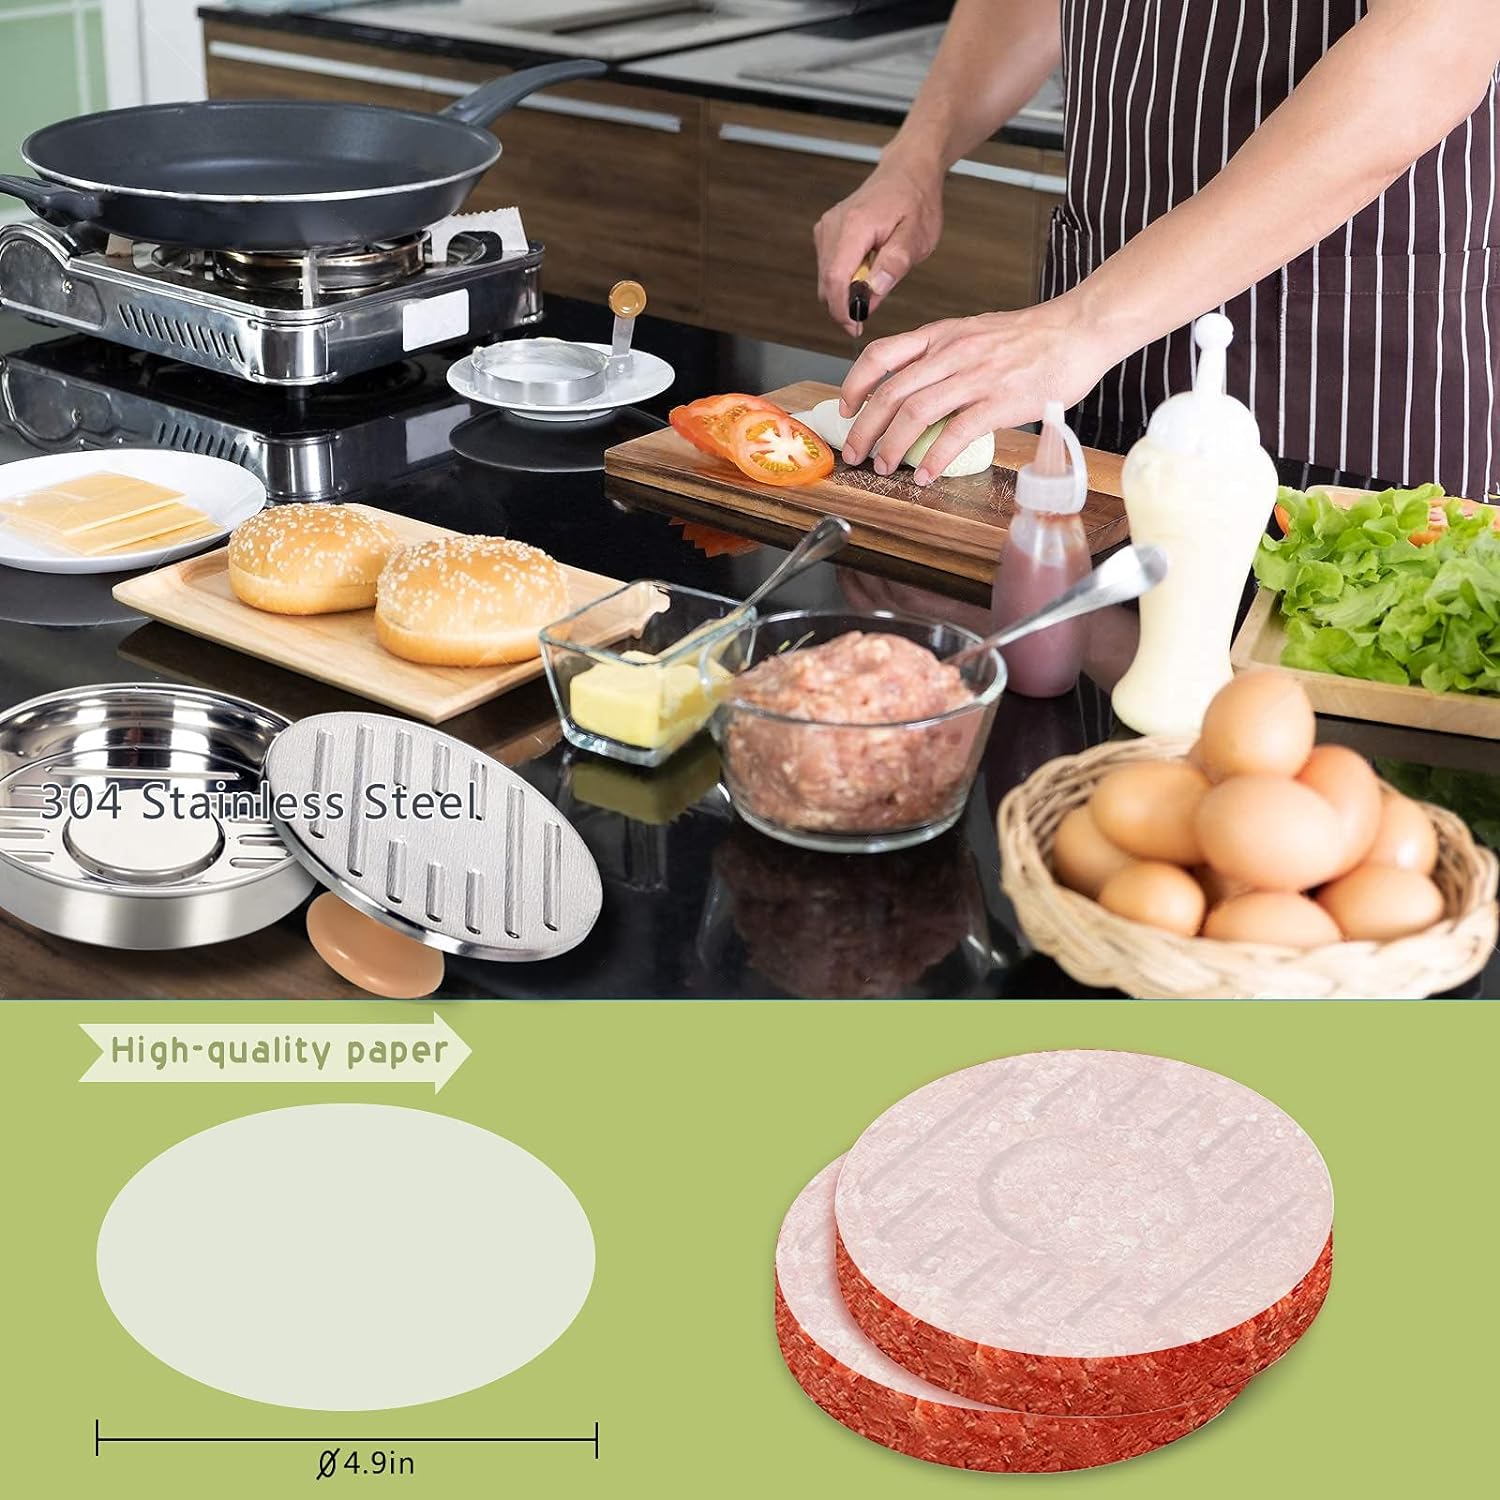 Great Choice Products Burger Press, 5”Stainless Steel Hamburger Press Patty Maker, Non-Stick Hamburger Press For Making Patties, For Grilling An